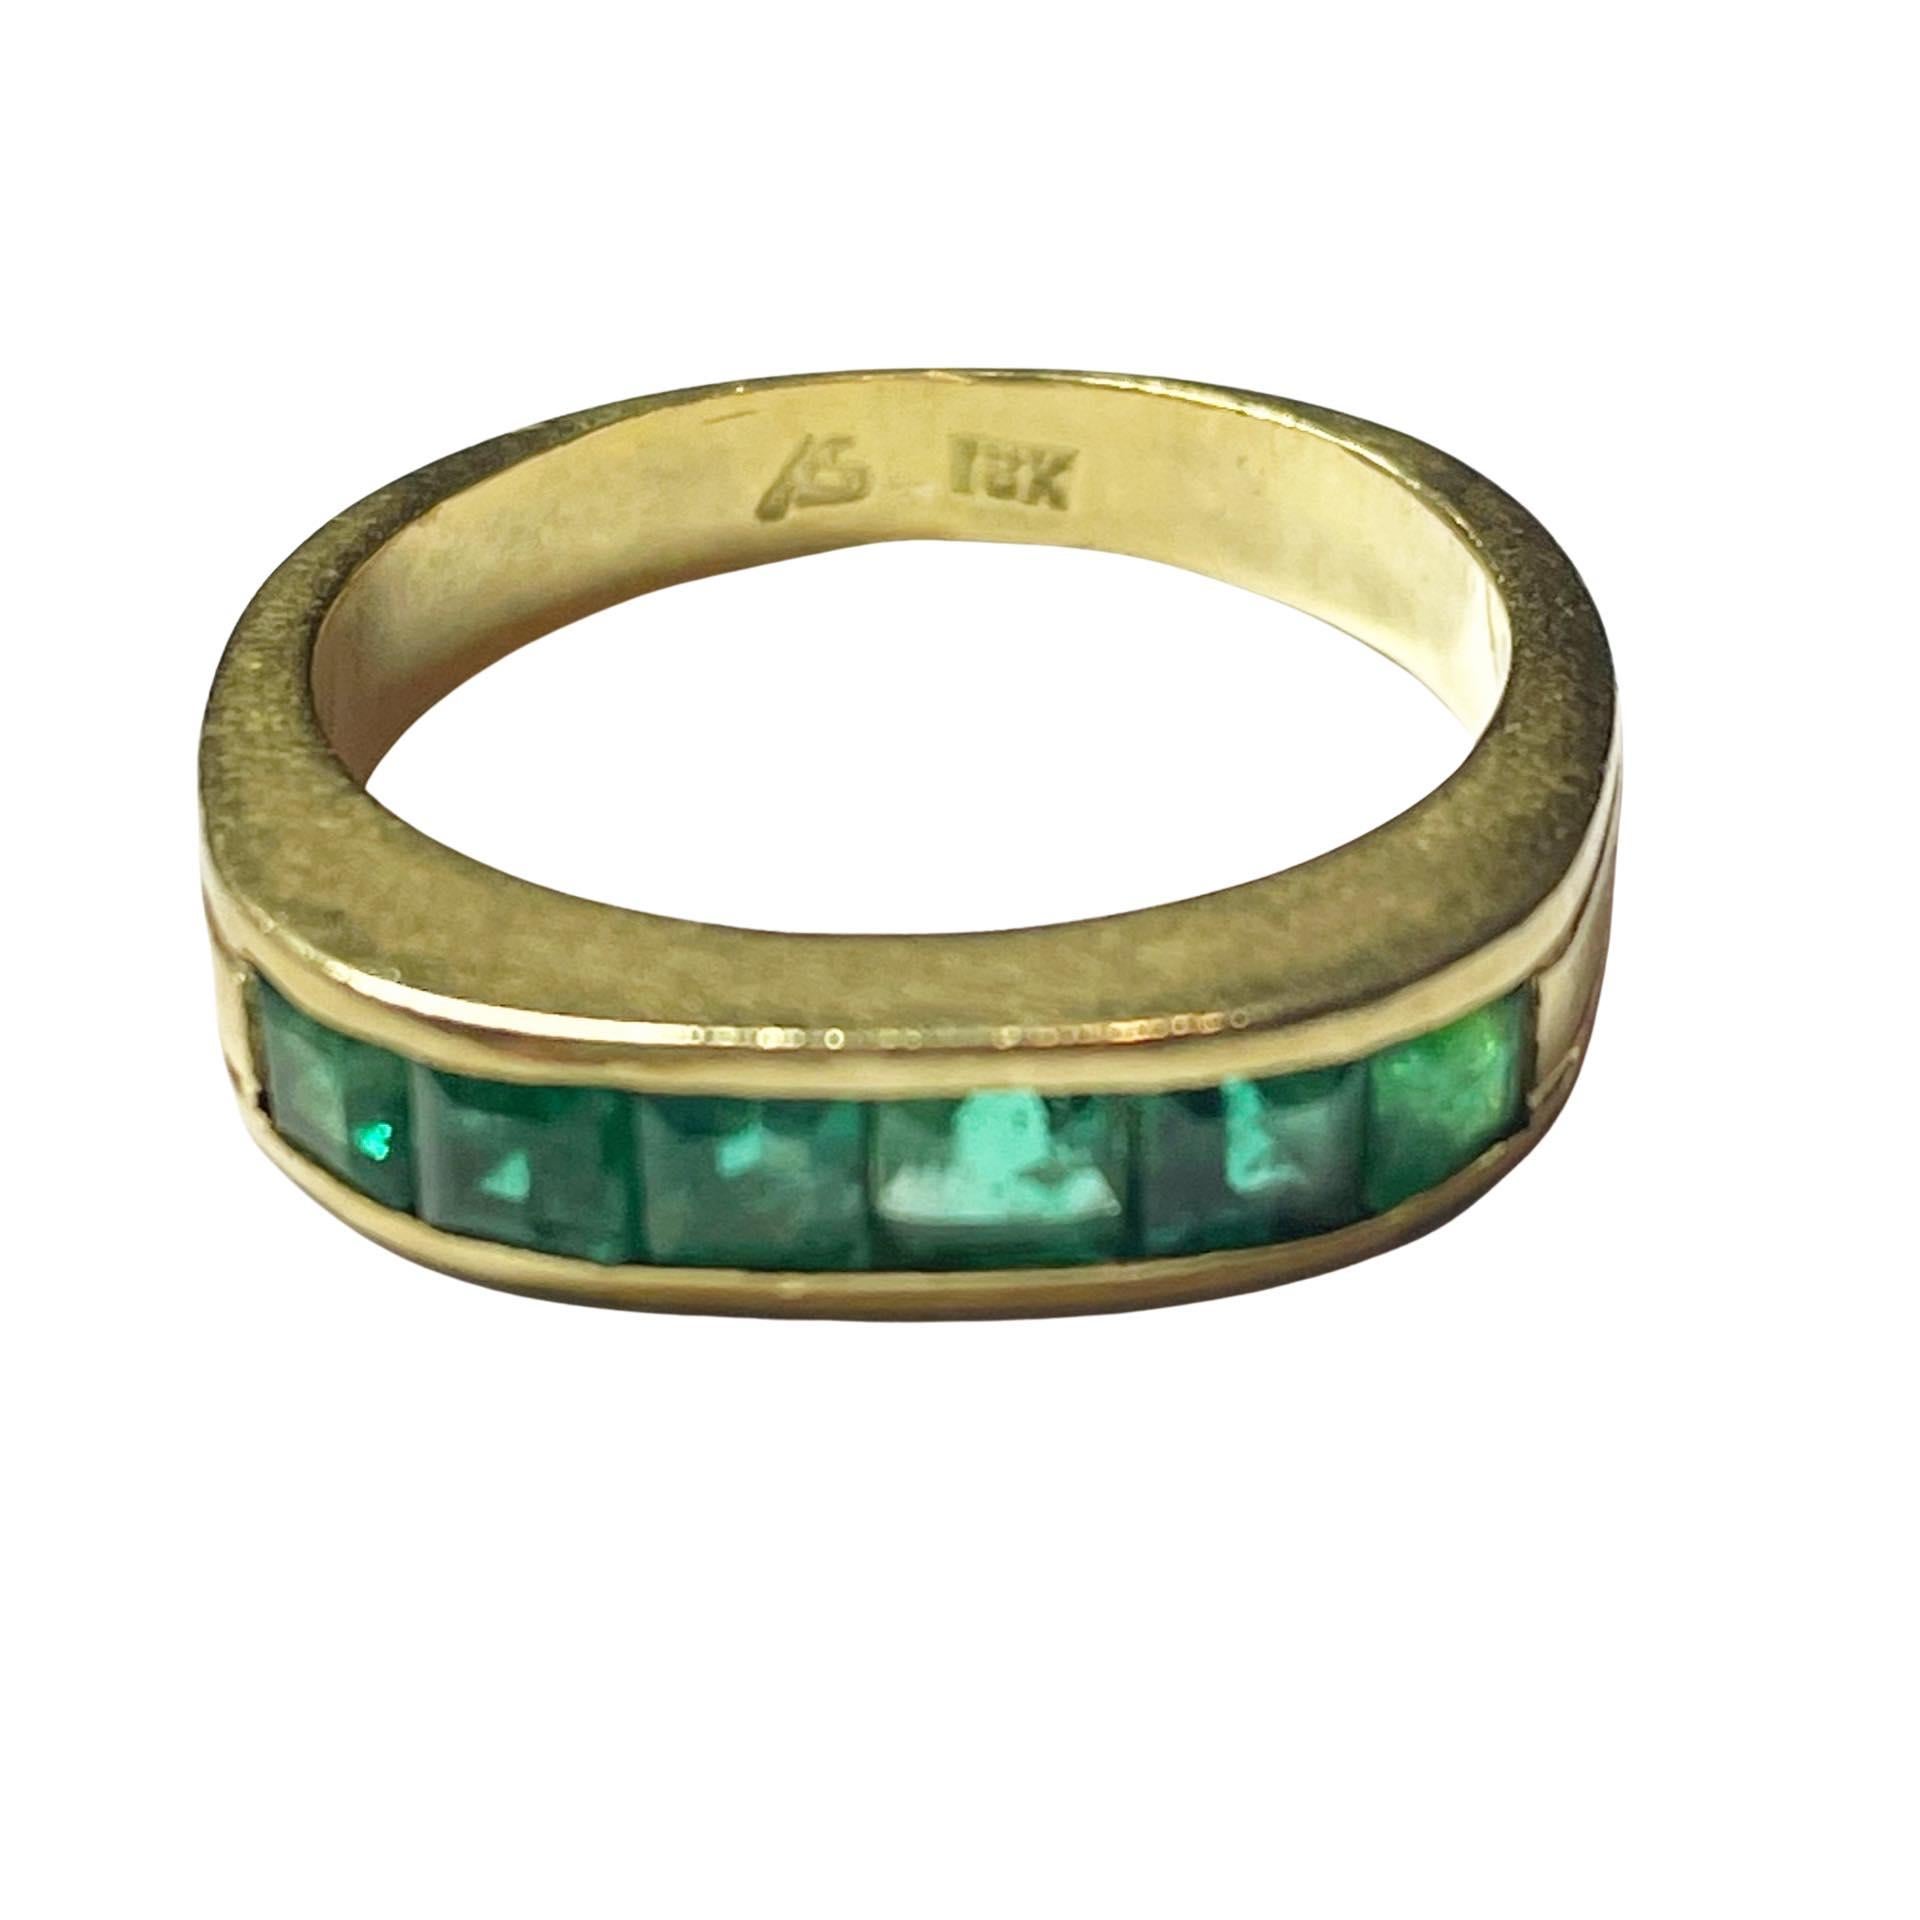 These beautiful green gems are Mays birthstone, set in an 18K yellow gold channel the straight shank design is delicately accented by two carved lines outlining the band.  This bands minimalist design is suitable for men or woman, worn alone,